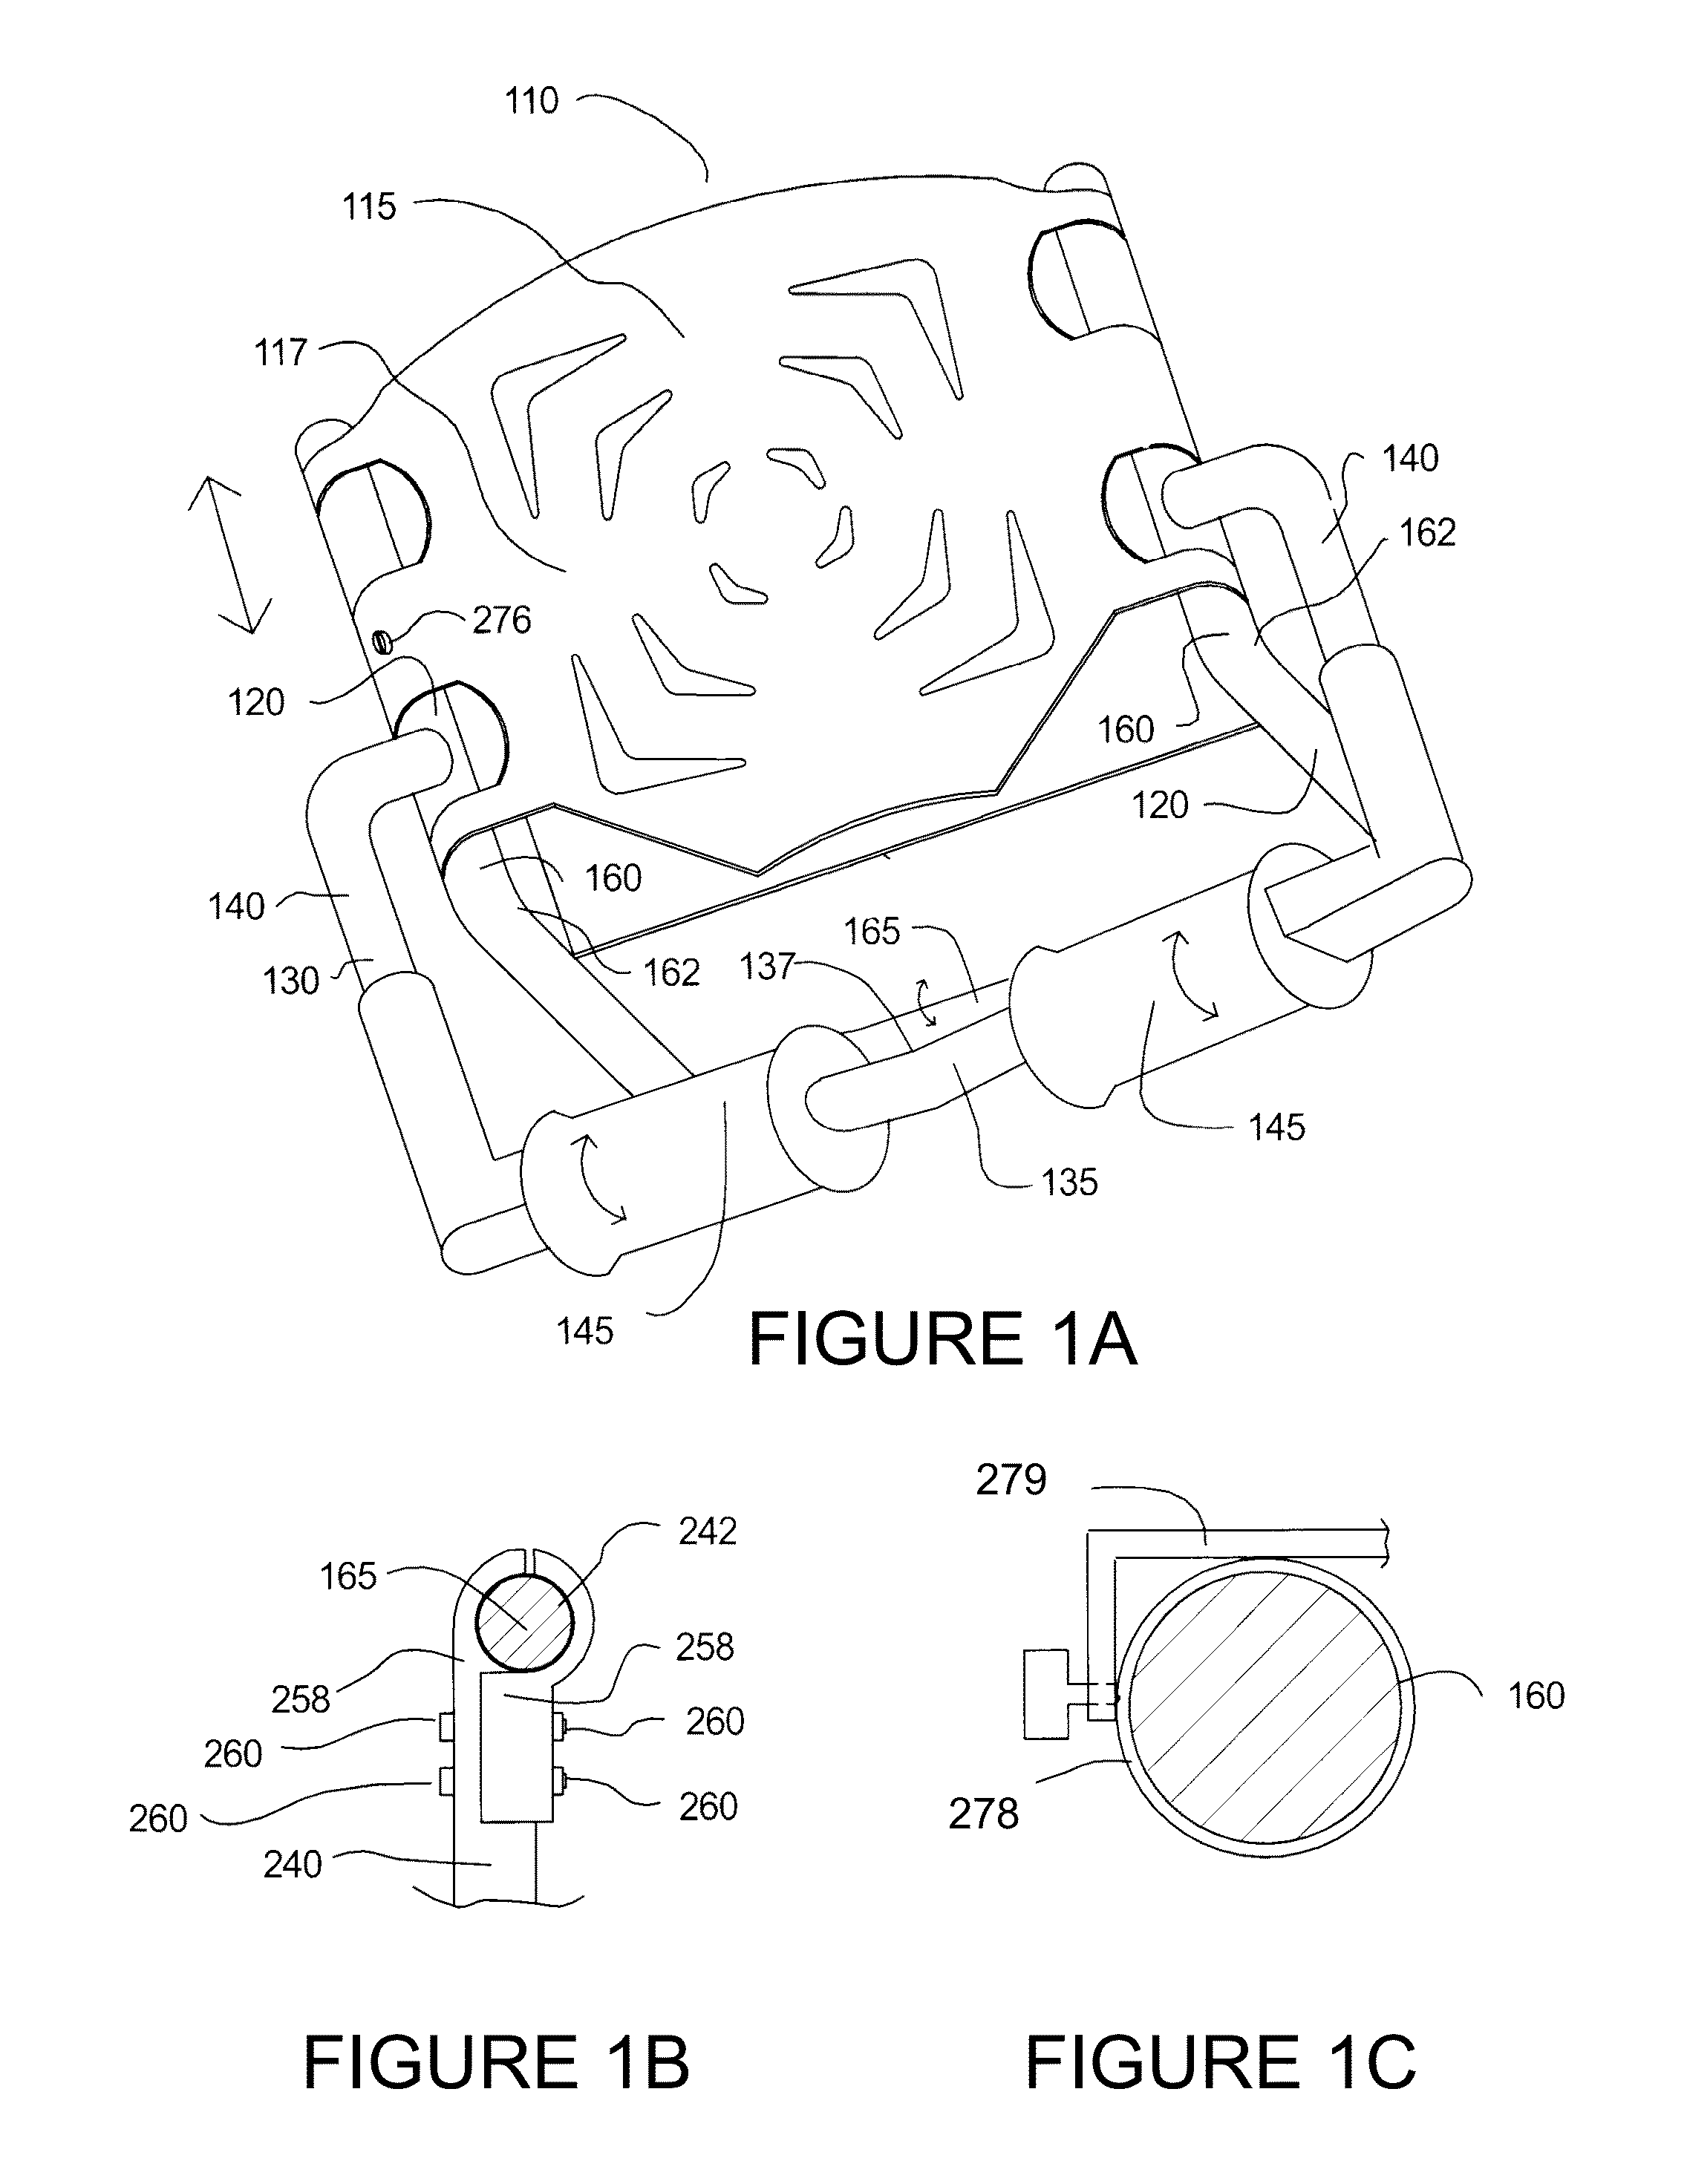 Platform for exercise apparatus and other devices